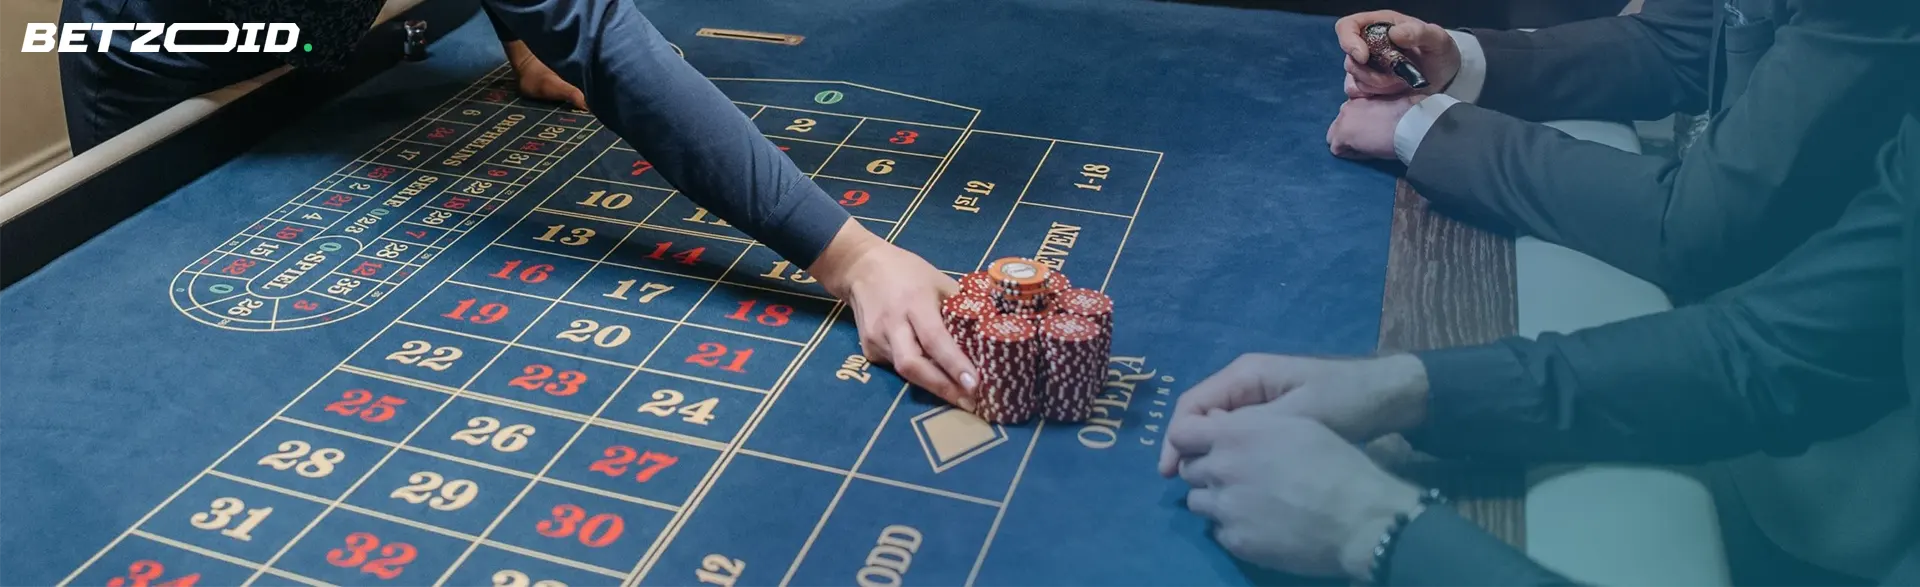 People playing at the table at online roulette casinos in Canada.